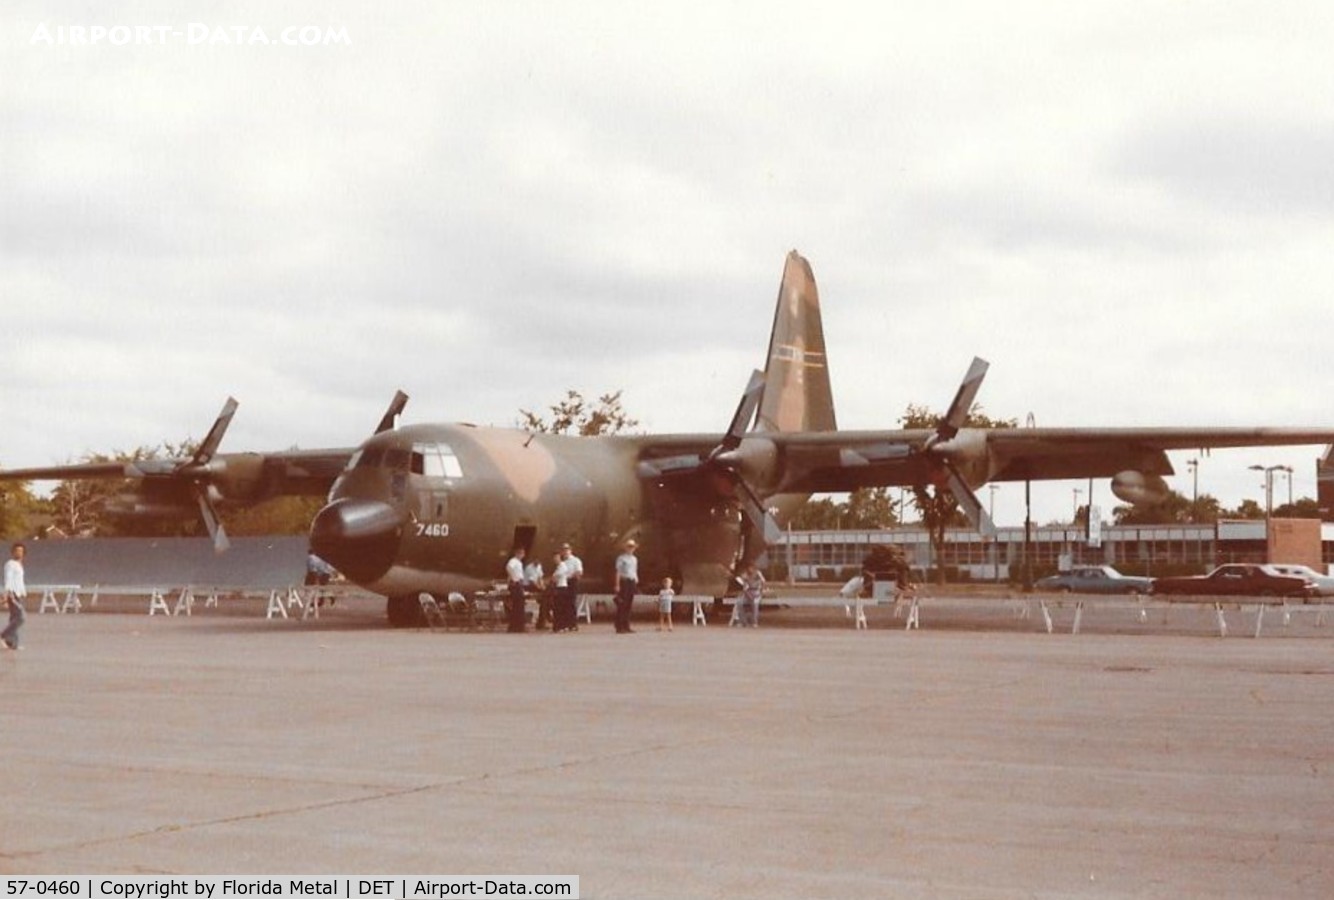 57-0460, 1957 Lockheed C-130A Hercules C/N 182-3167, C-130A Hercules taken by my grandfather Louis Dzialo in 1978 at Detroit City Airport Airshow